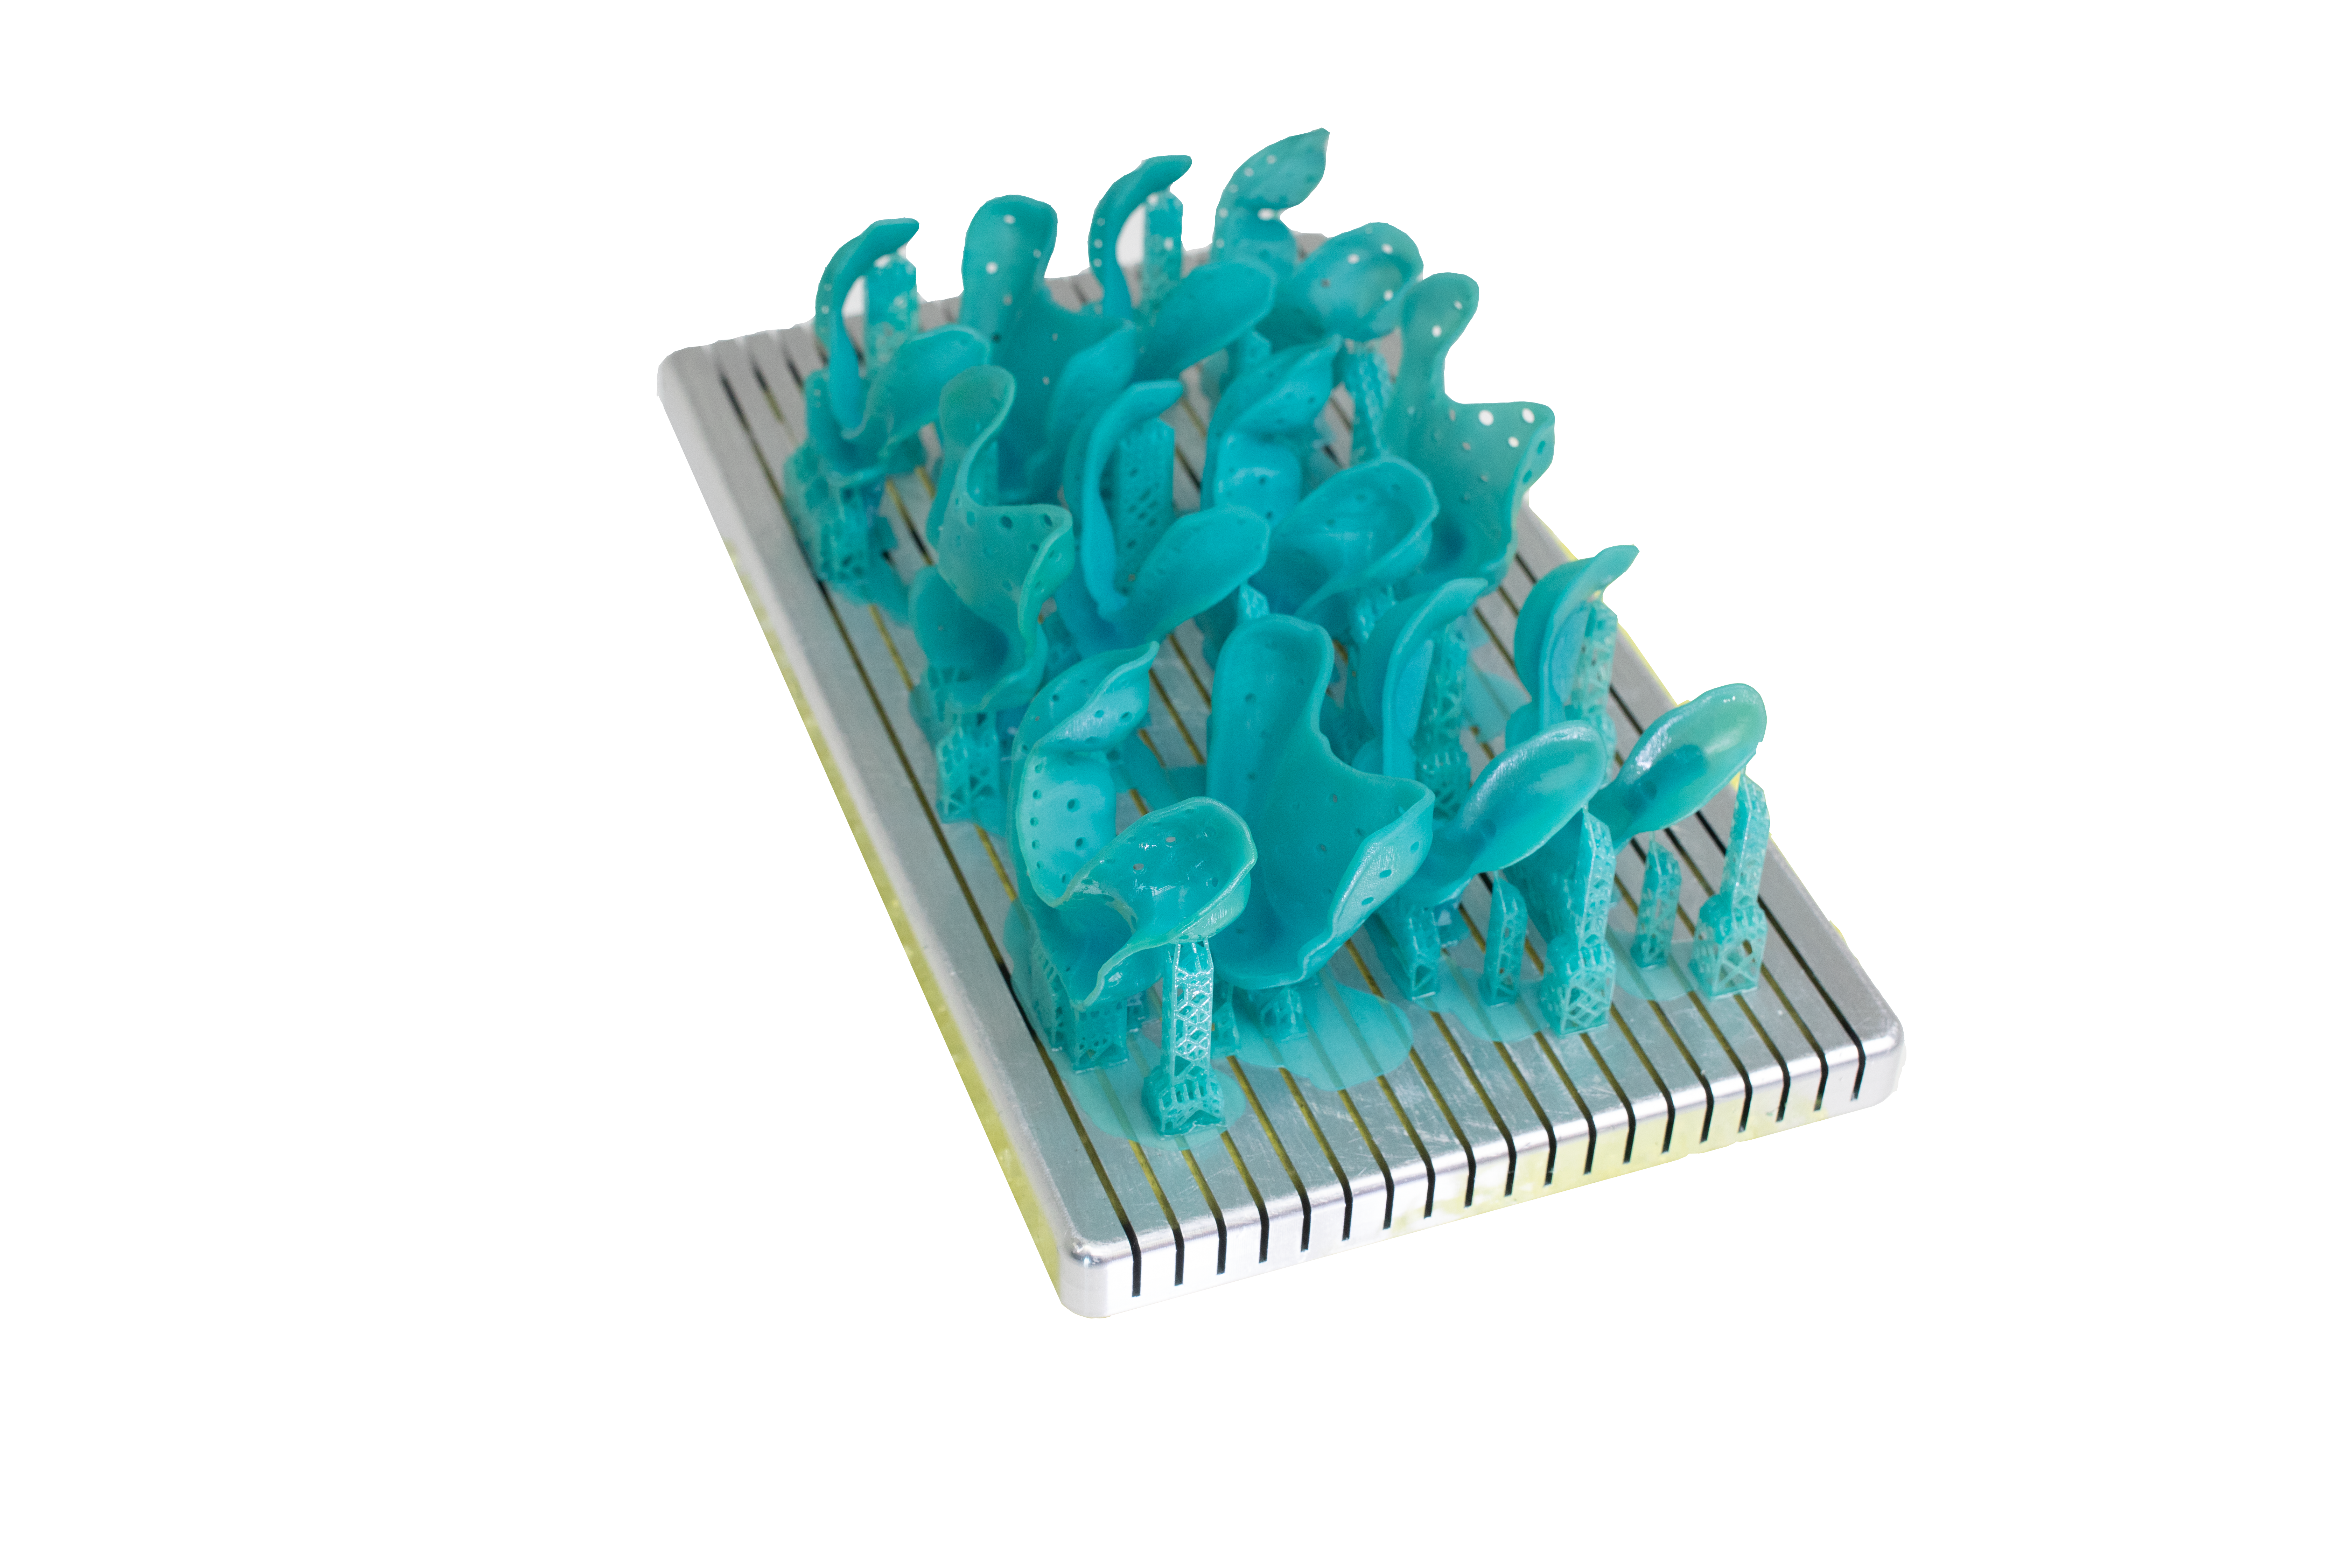 3D printed dental trays from the Varseo Xl. Image via IDS/BEGO.